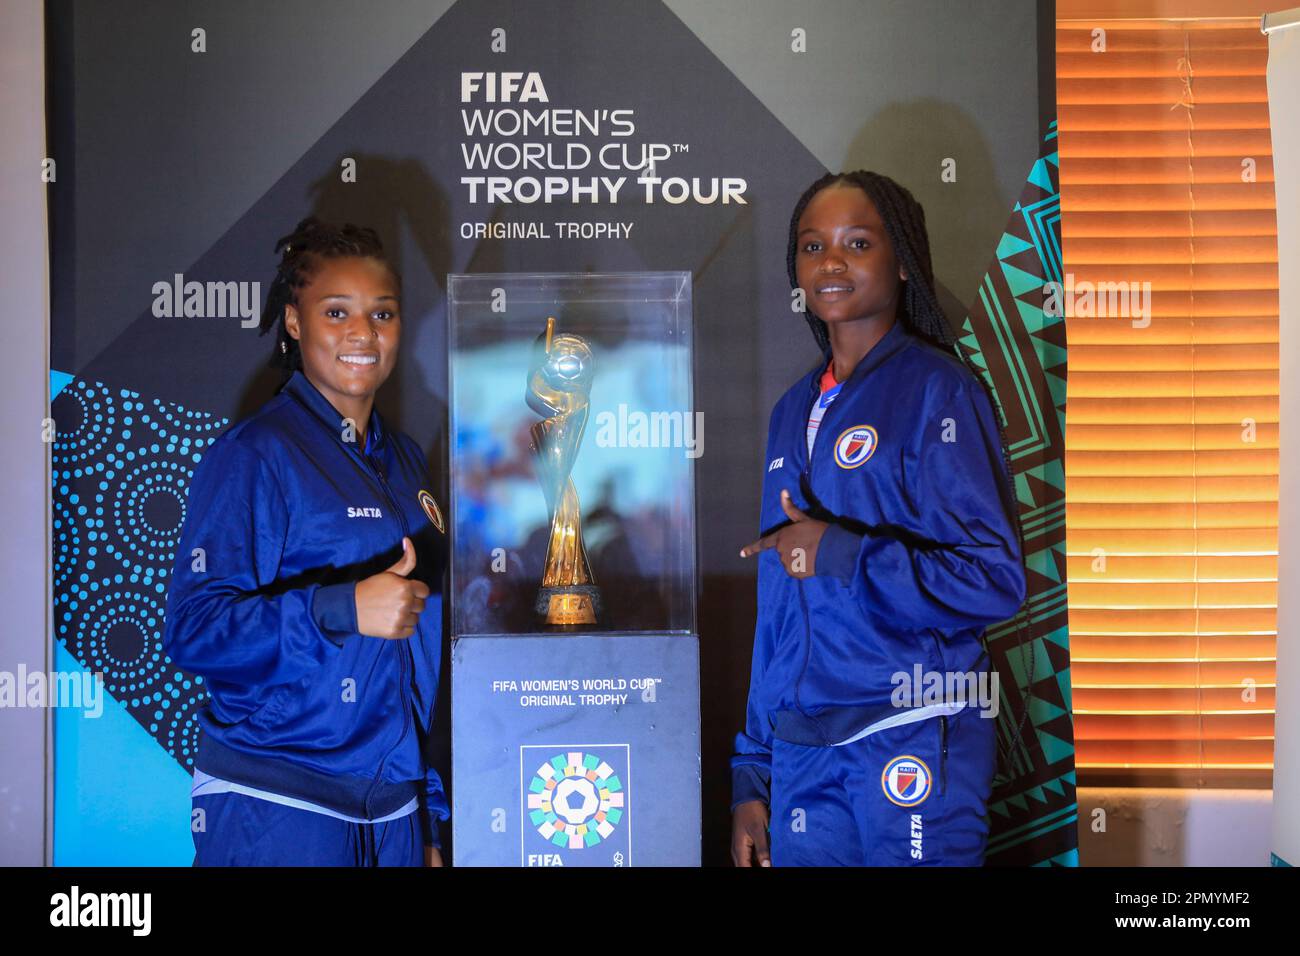 https://c8.alamy.com/comp/2PMYMF2/haitian-goalkeeper-kerly-theus-left-and-fellow-teammate-esthericove-joseph-pose-for-a-photo-alongside-the-womens-world-cup-trophy-during-a-ceremony-as-part-of-its-global-tour-in-port-au-prince-haiti-saturday-april-15-2023-a-fifa-delegation-is-traveling-with-the-trophy-to-all-32-nations-participating-in-the-soccer-tournament-which-kicks-off-on-july-20th-co-hosted-by-australia-and-new-zealand-ap-photoodelyn-joseph-2PMYMF2.jpg